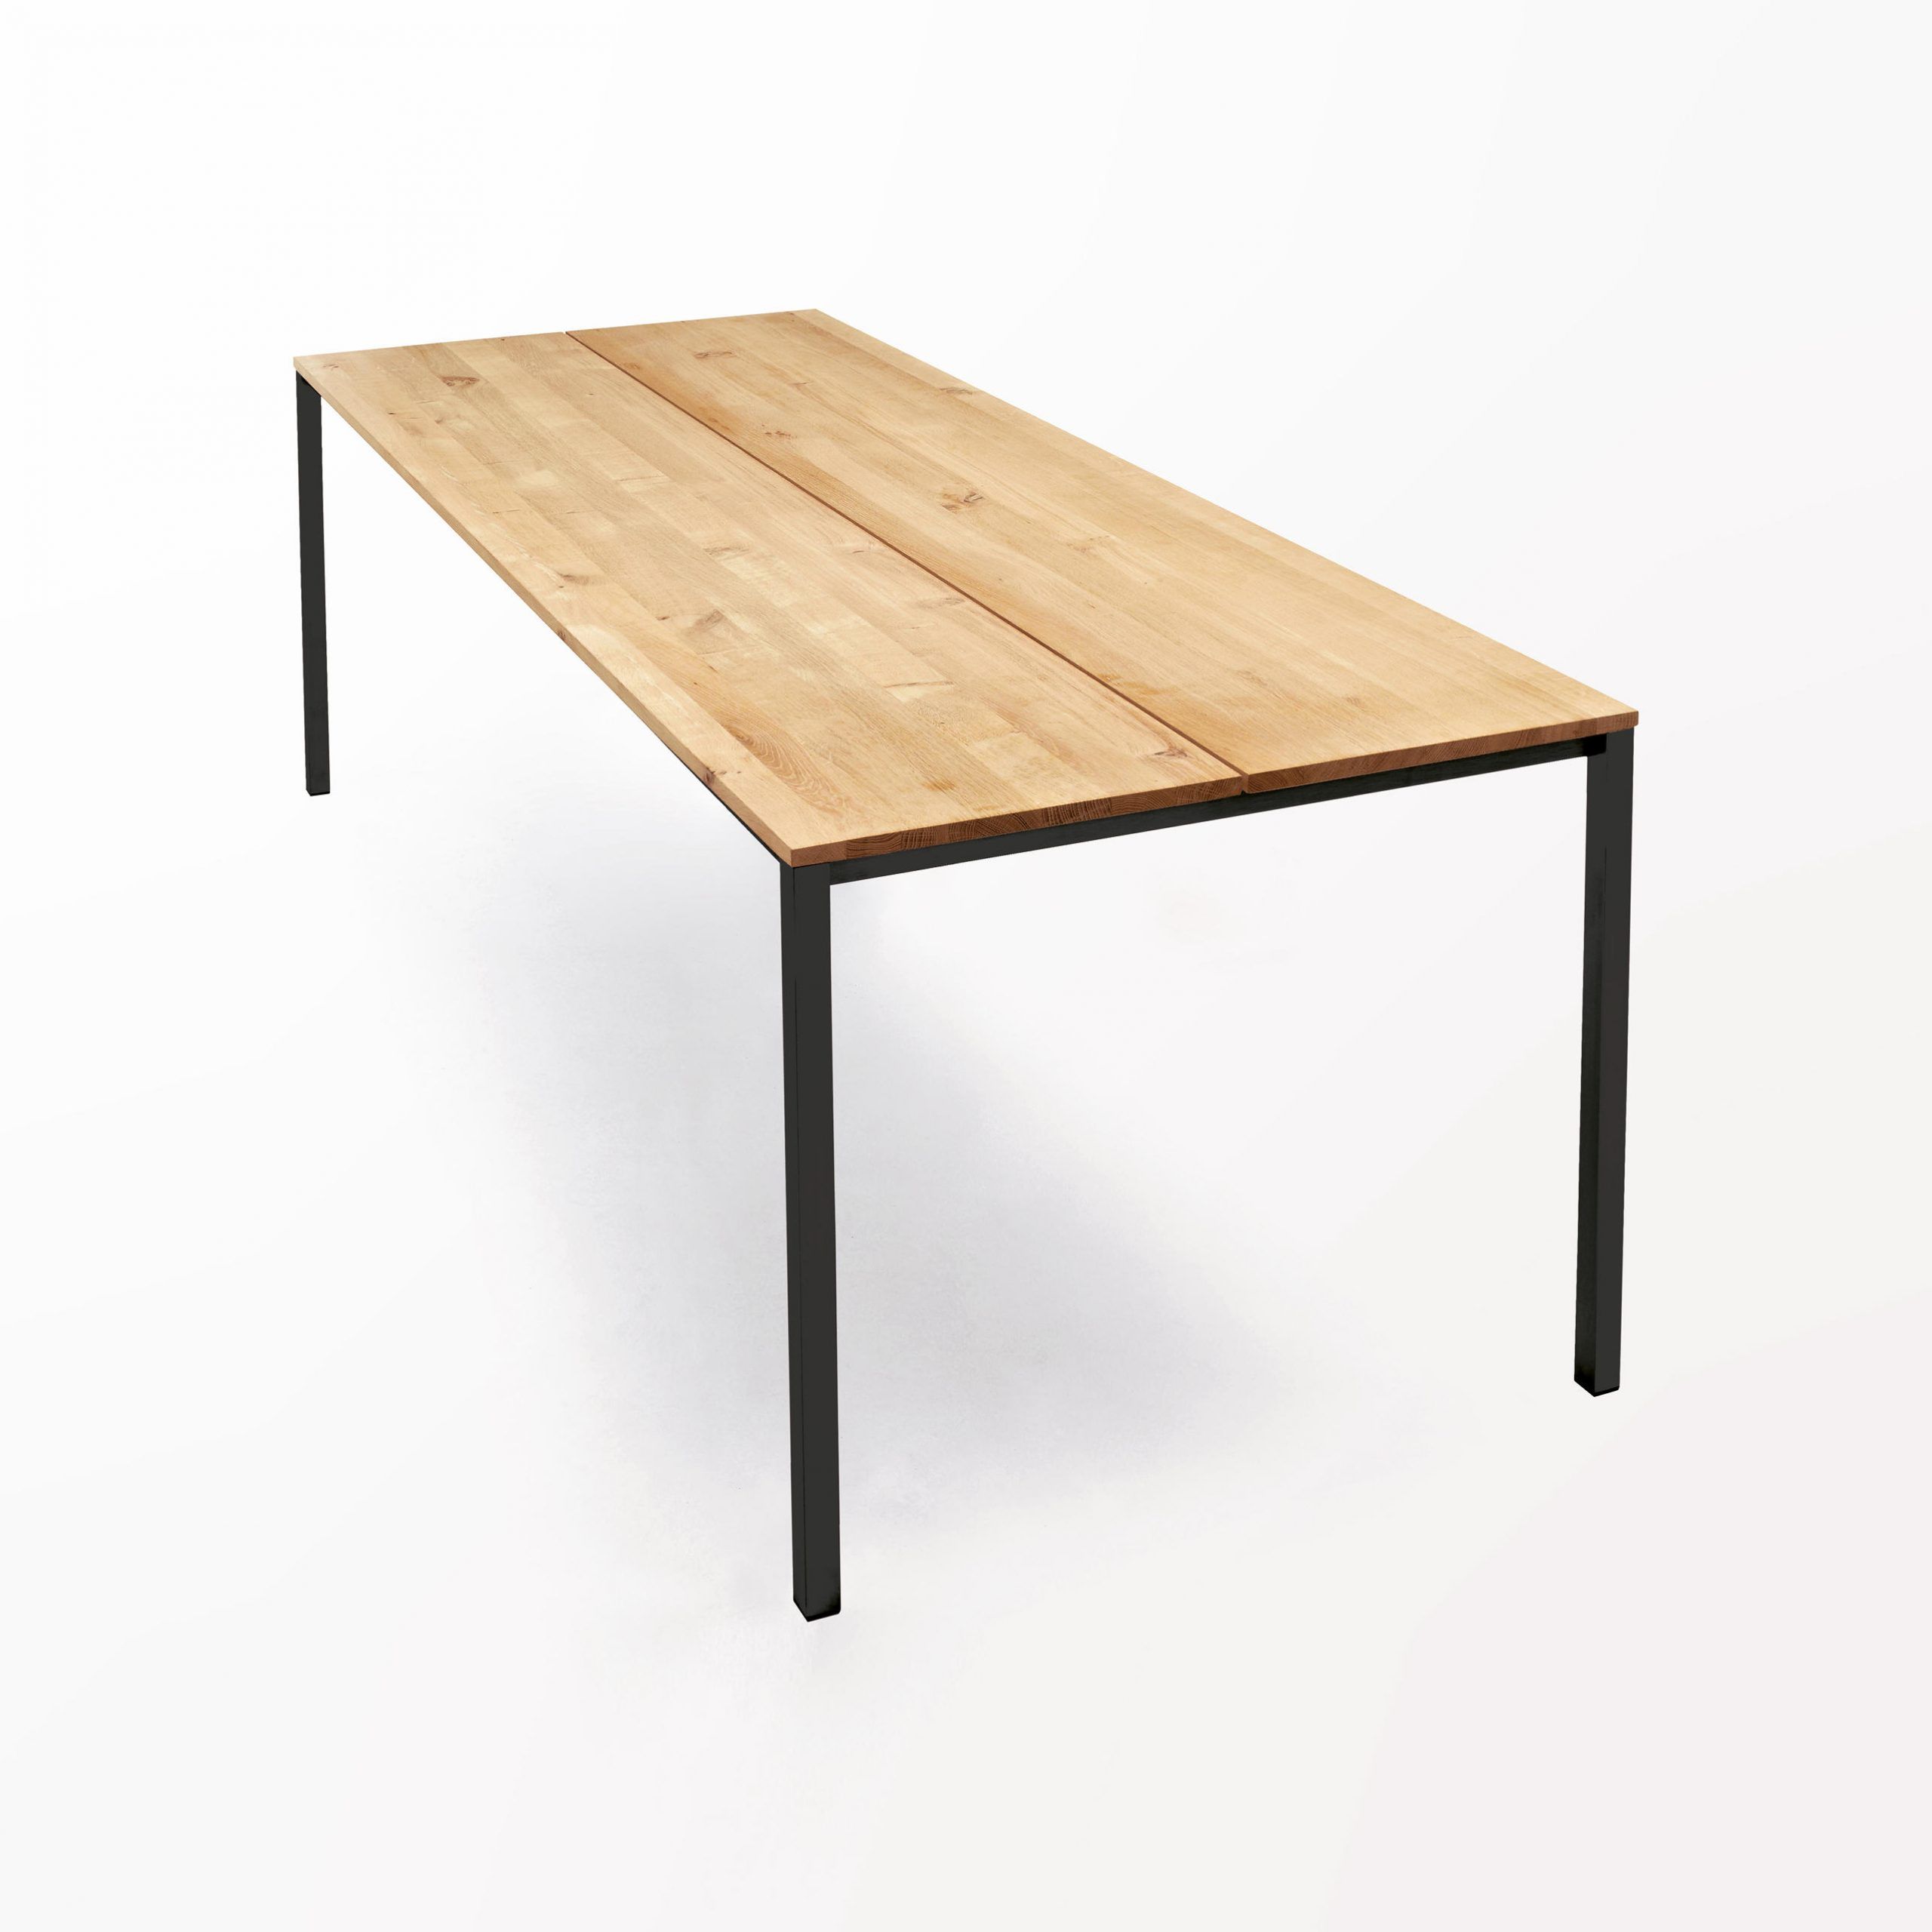 Architonic For Well Known Dining Tables With Black U Legs (View 17 of 30)